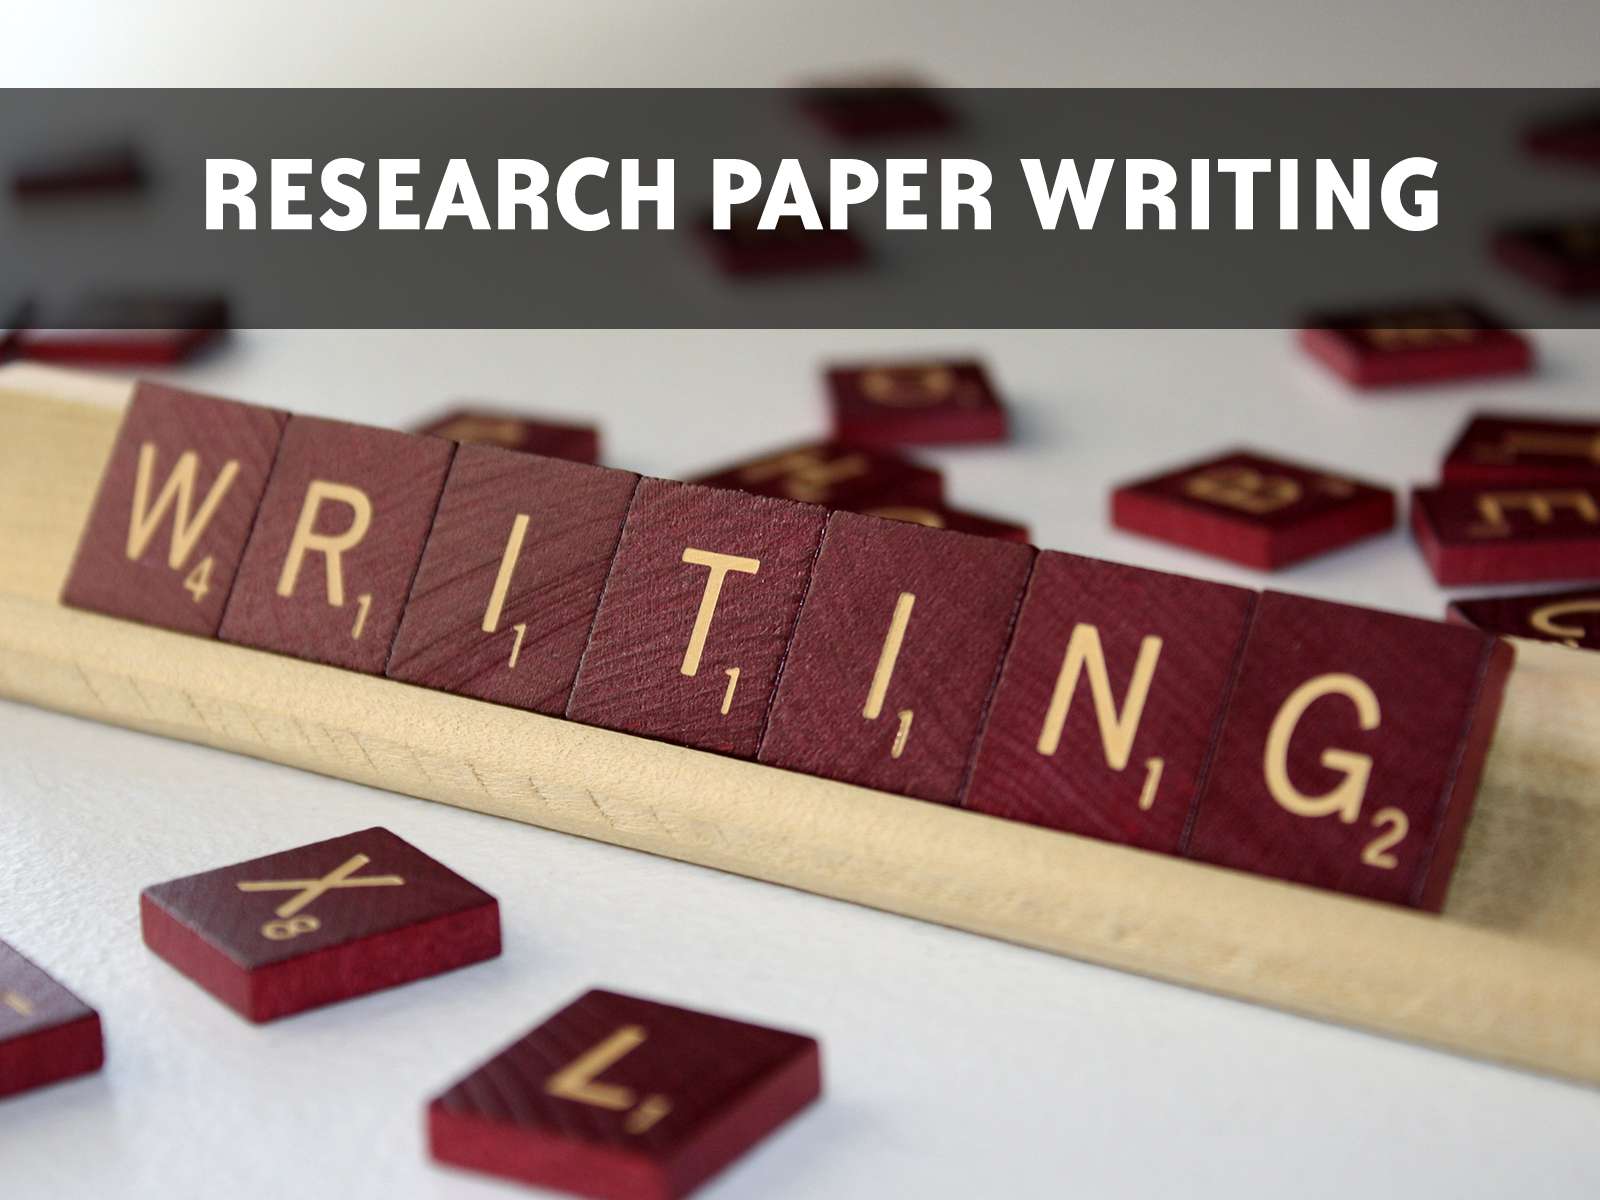 what is academic writing research